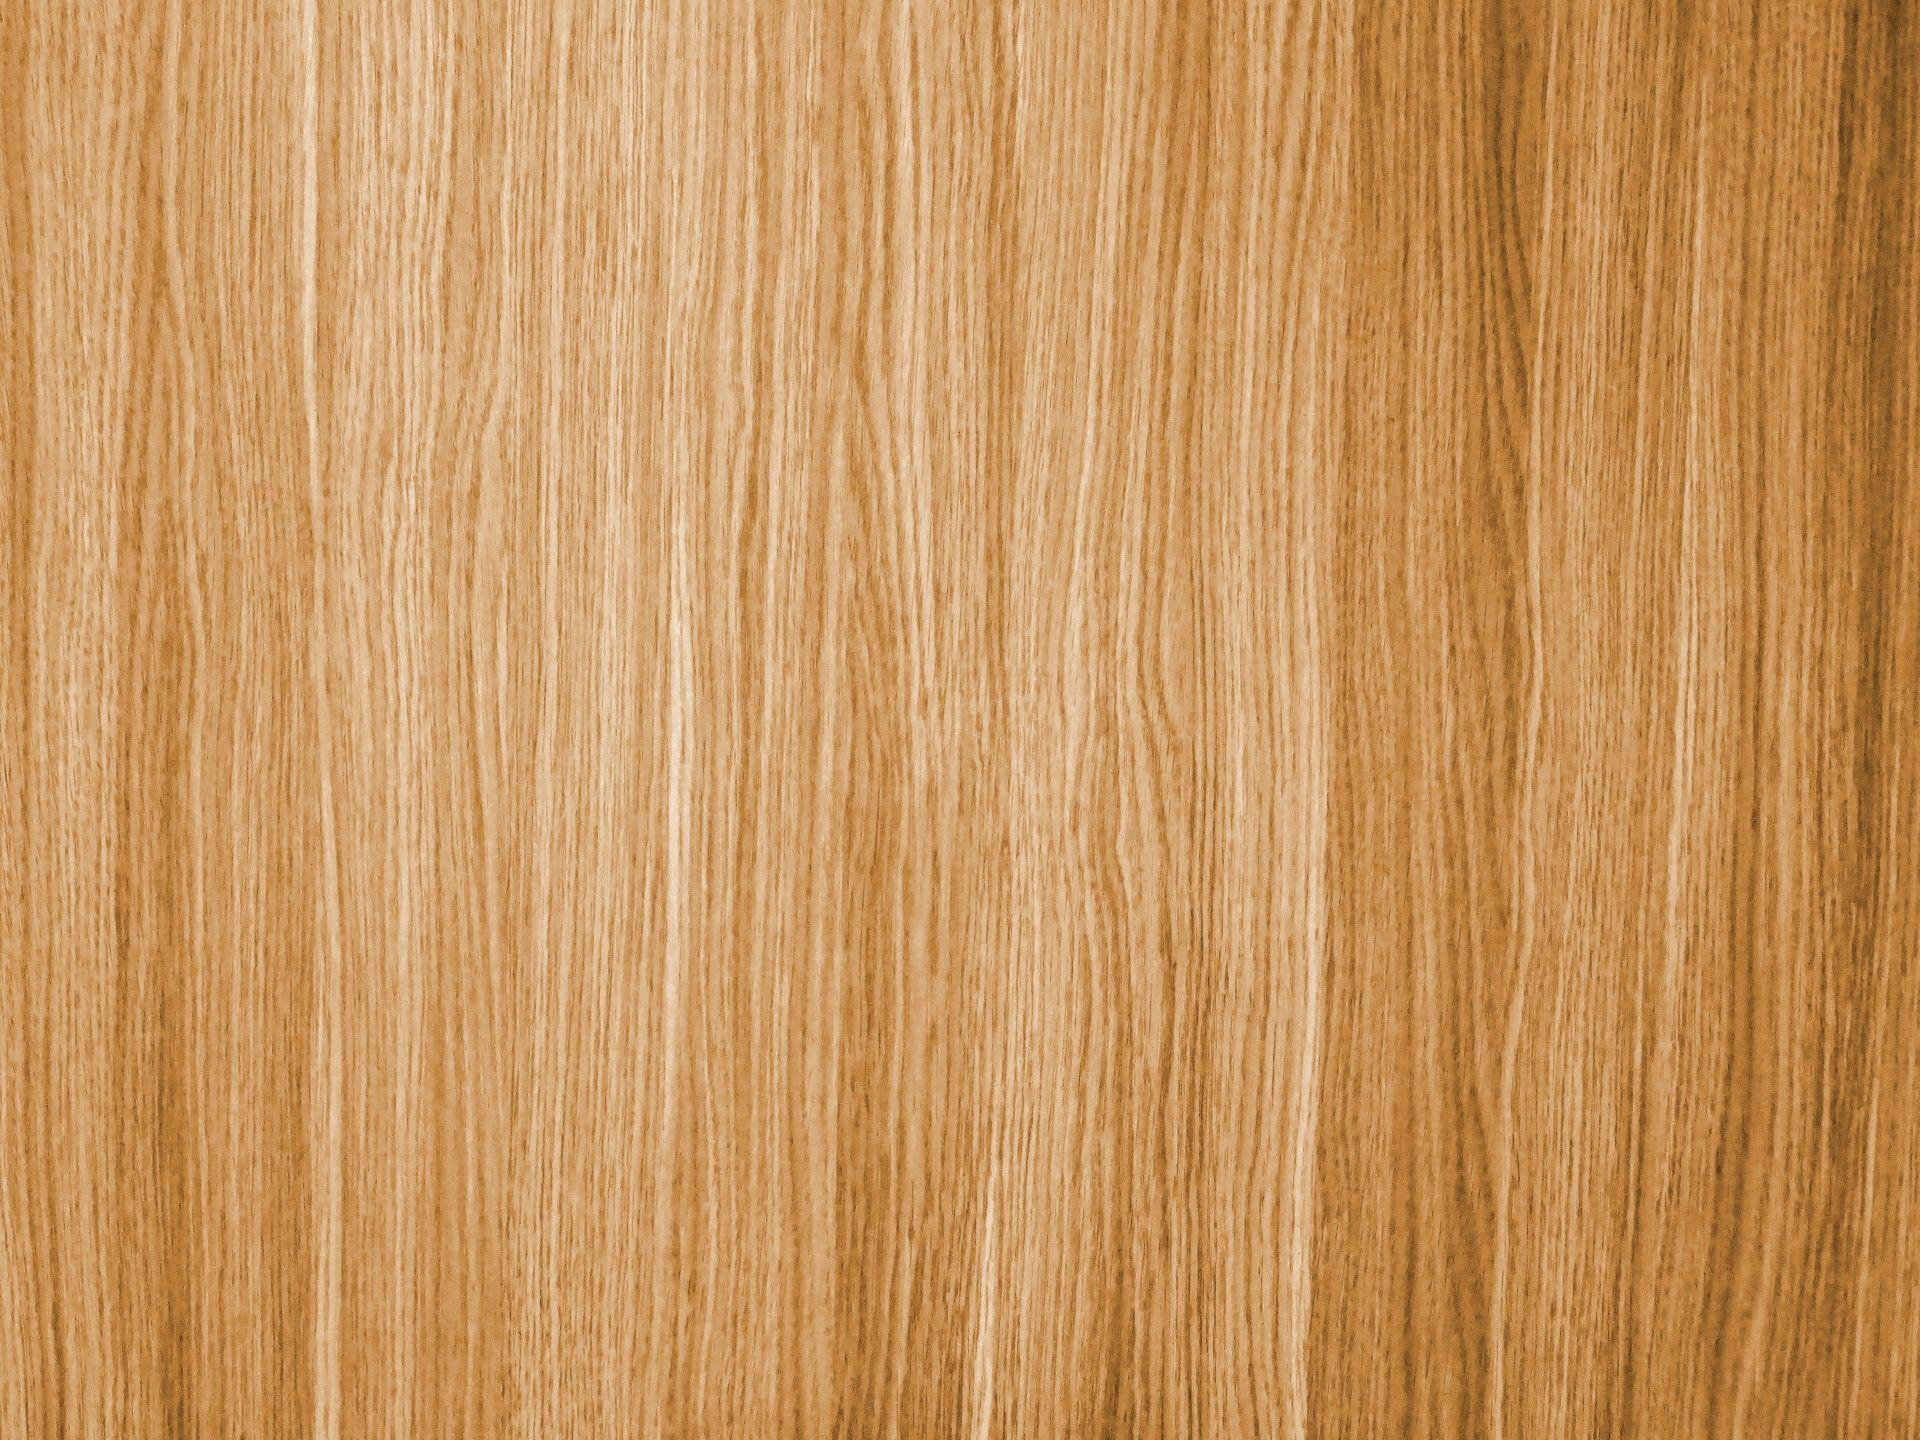 Natural Wood Grain Background Free Domain Picture